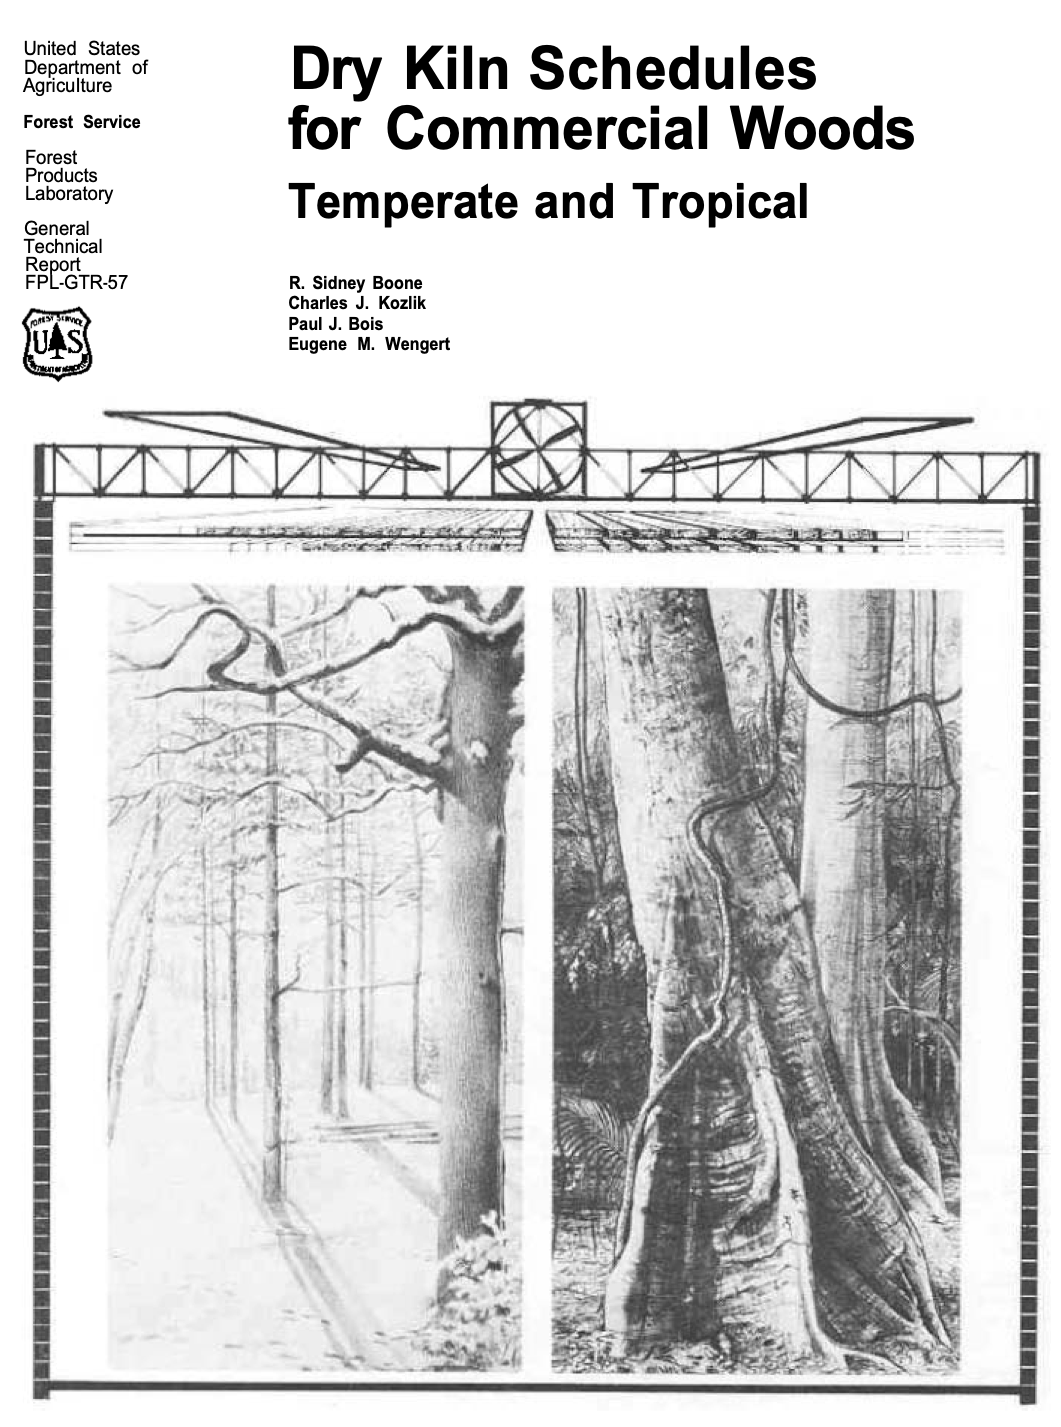 Dry Kiln Schedules for Commercial Woods Temperate and Tropical